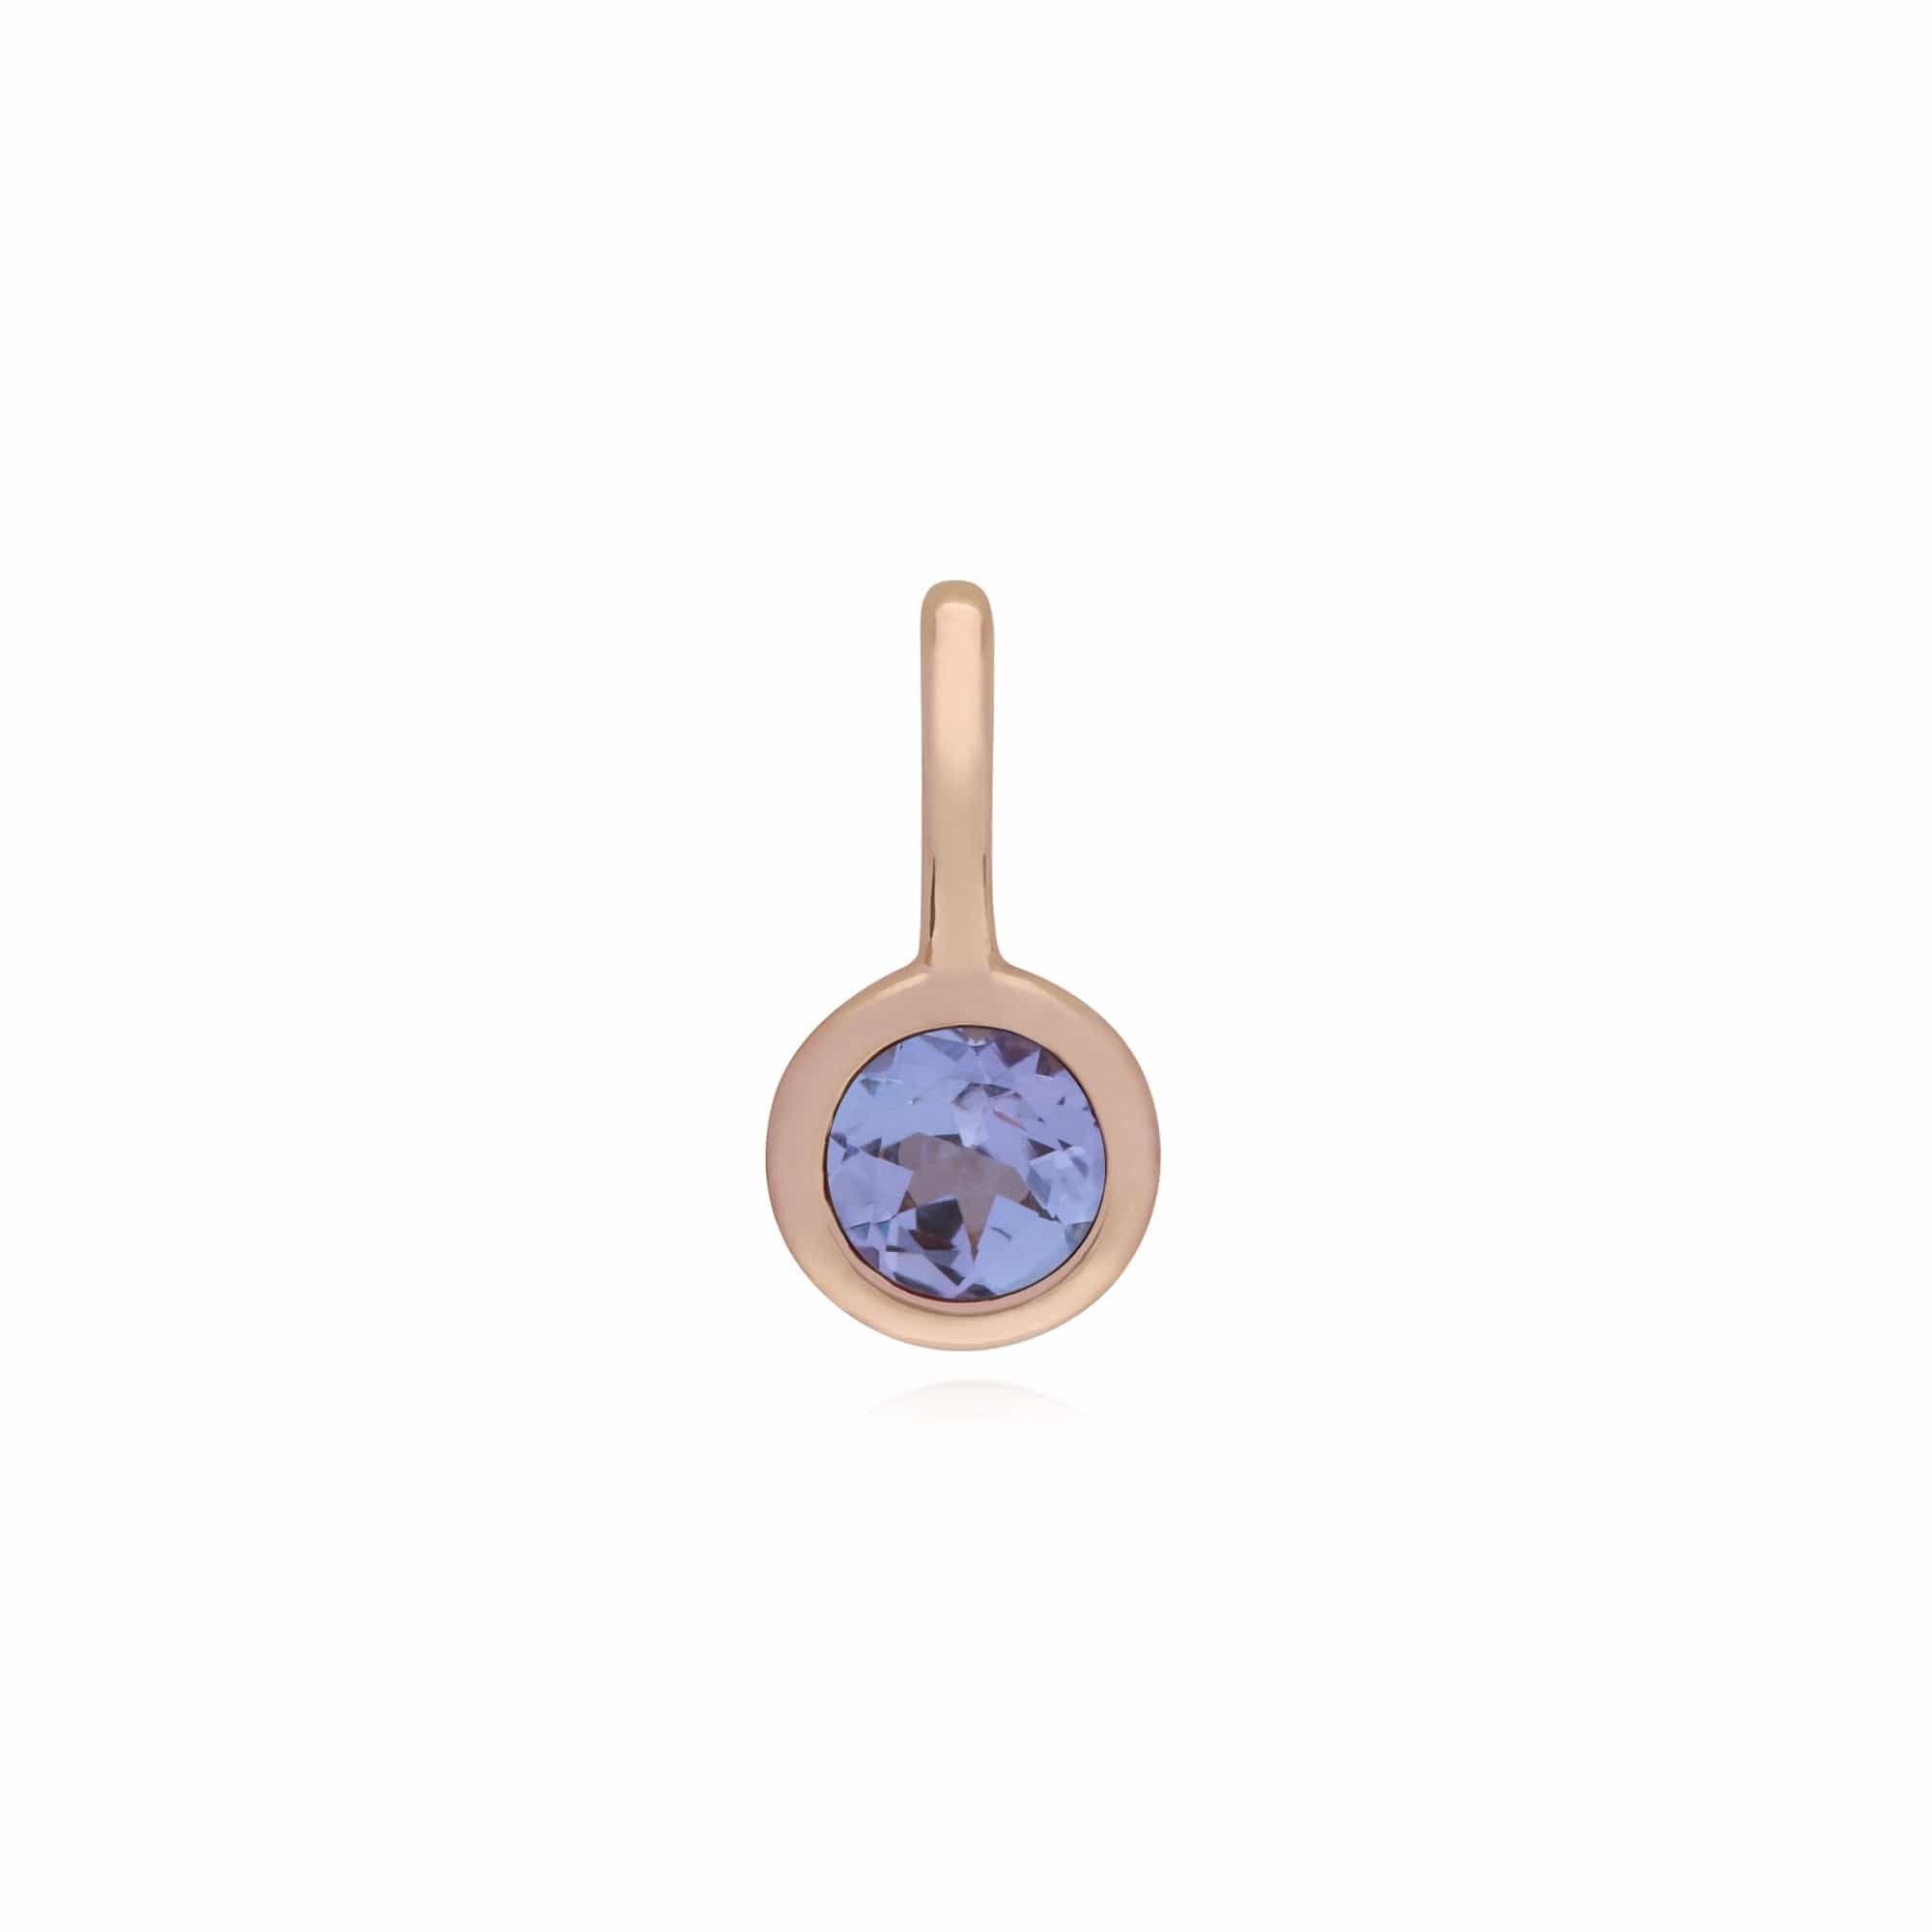 270P027306925-270P026501925 Classic Swirl Heart Lock Pendant & Tanzanite Charm in Rose Gold Plated 925 Sterling Silver 2